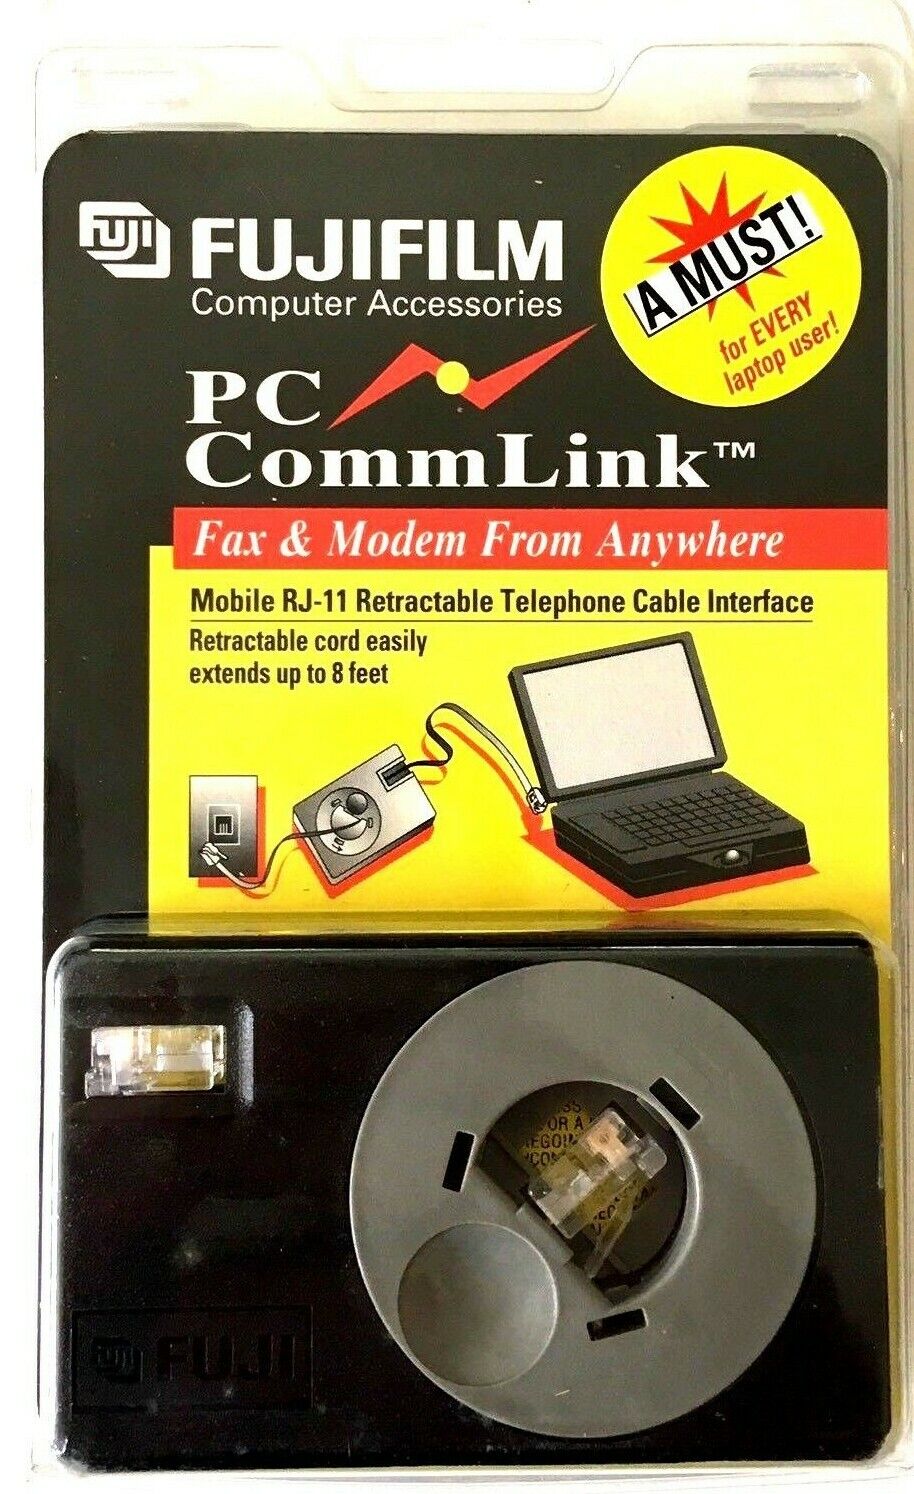 Fujifilm PC COMM Link Mobile RJ-11 Retractable Telephone Cable Interface NOS